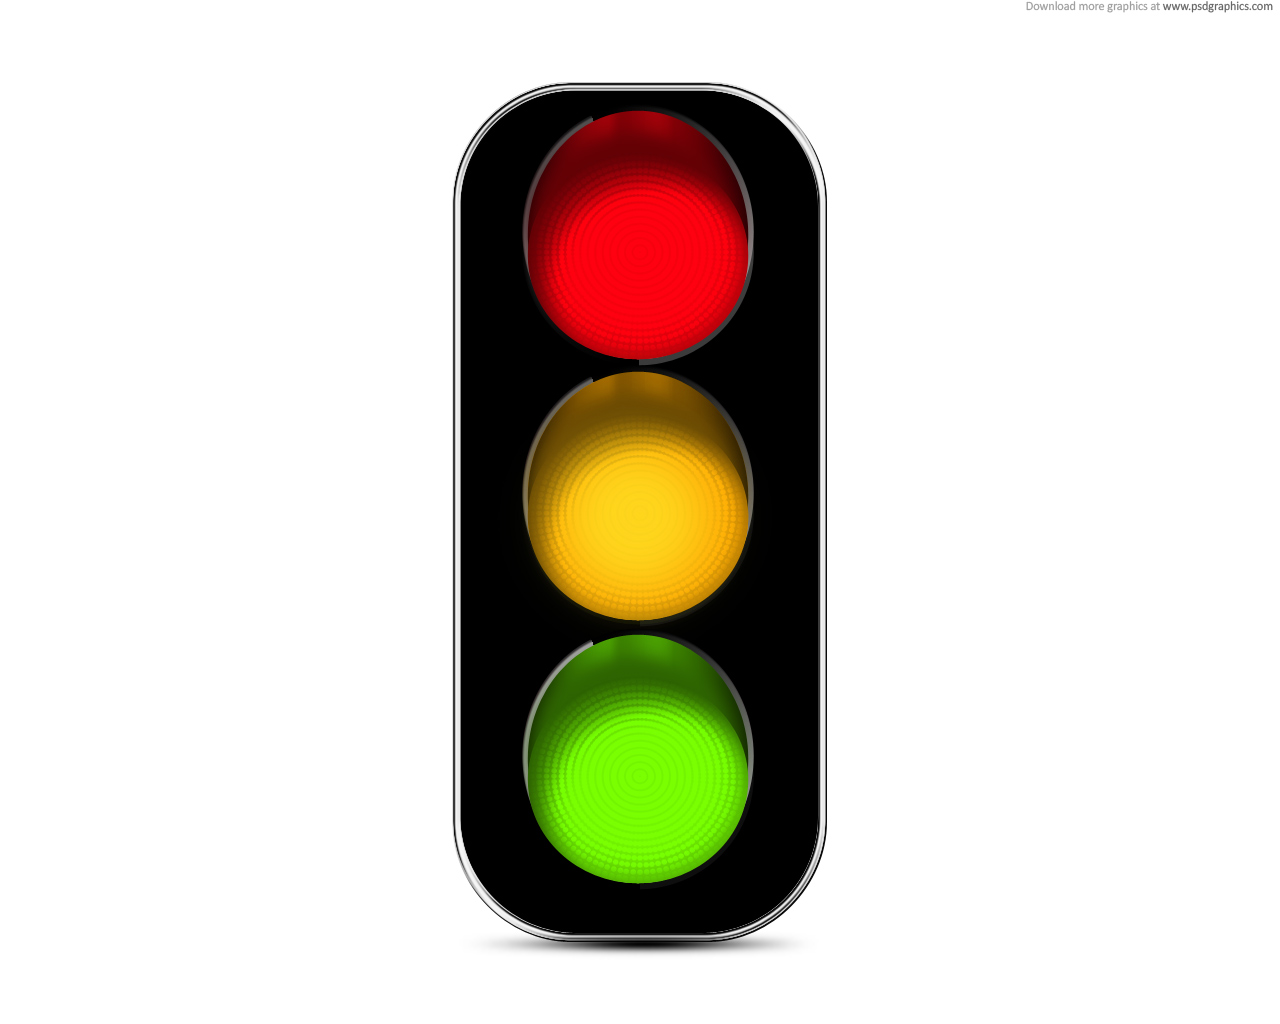 Green Stop Light Clipart - Free Clipart Images